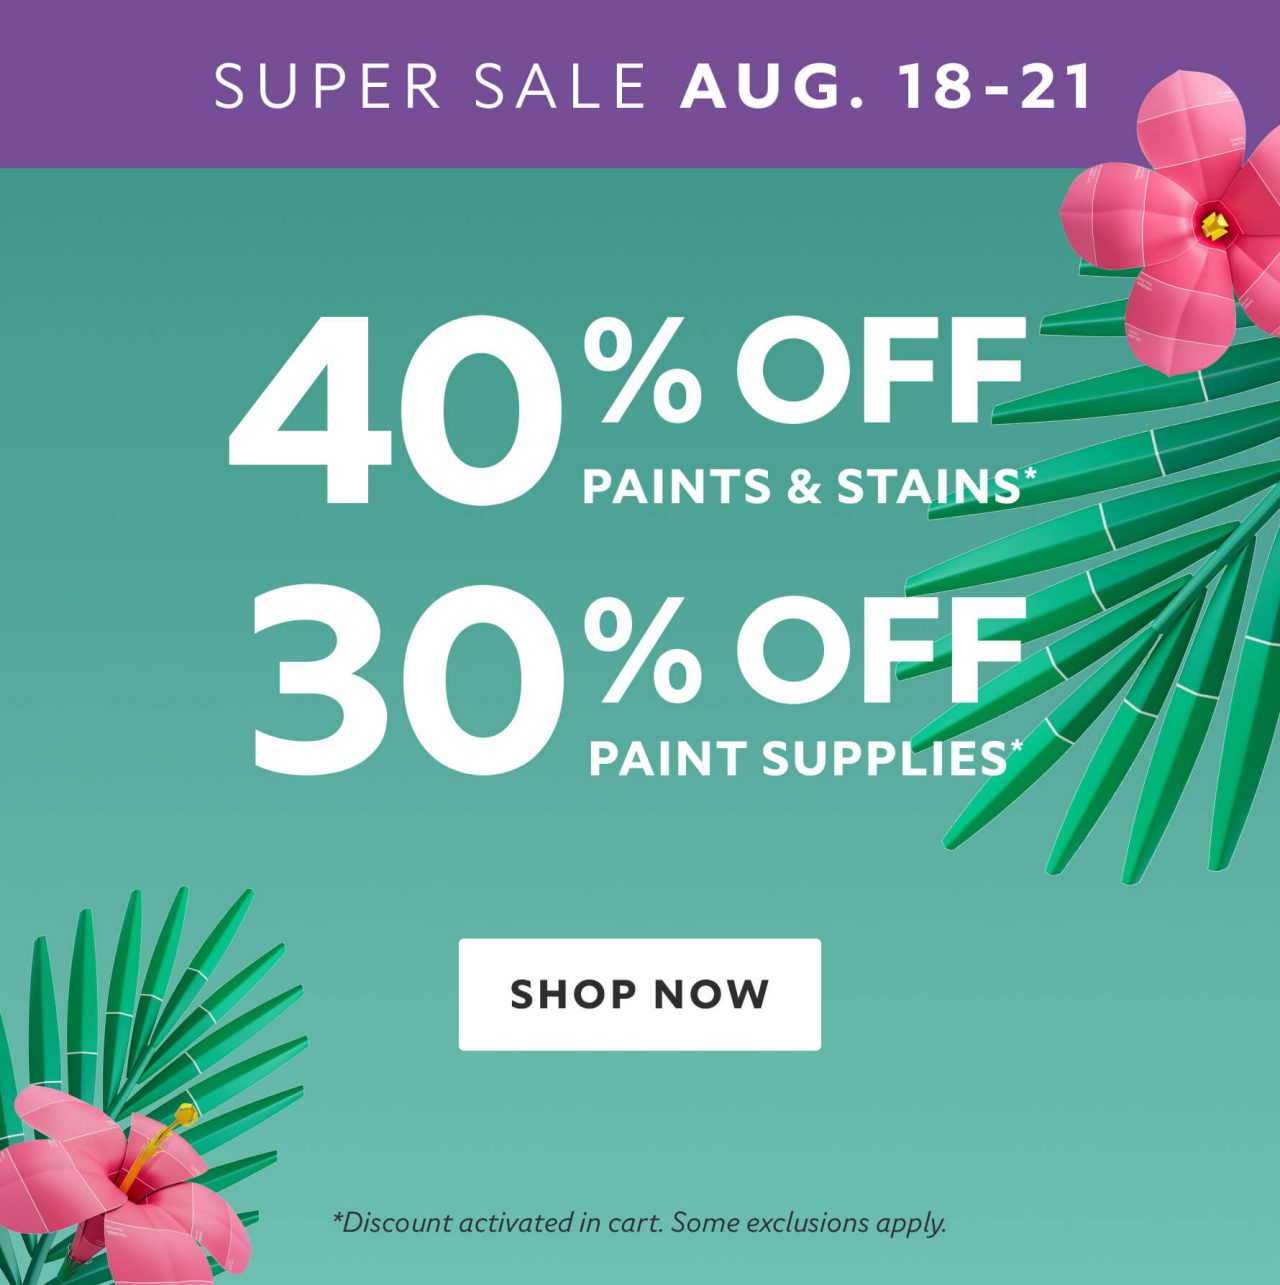 Super Sale Aug. 18-21. 40% OFF Paints & Stains, 30% OFF Paint Supplies. Shop Now. *Discount activated in cart. Some exclusions apply.